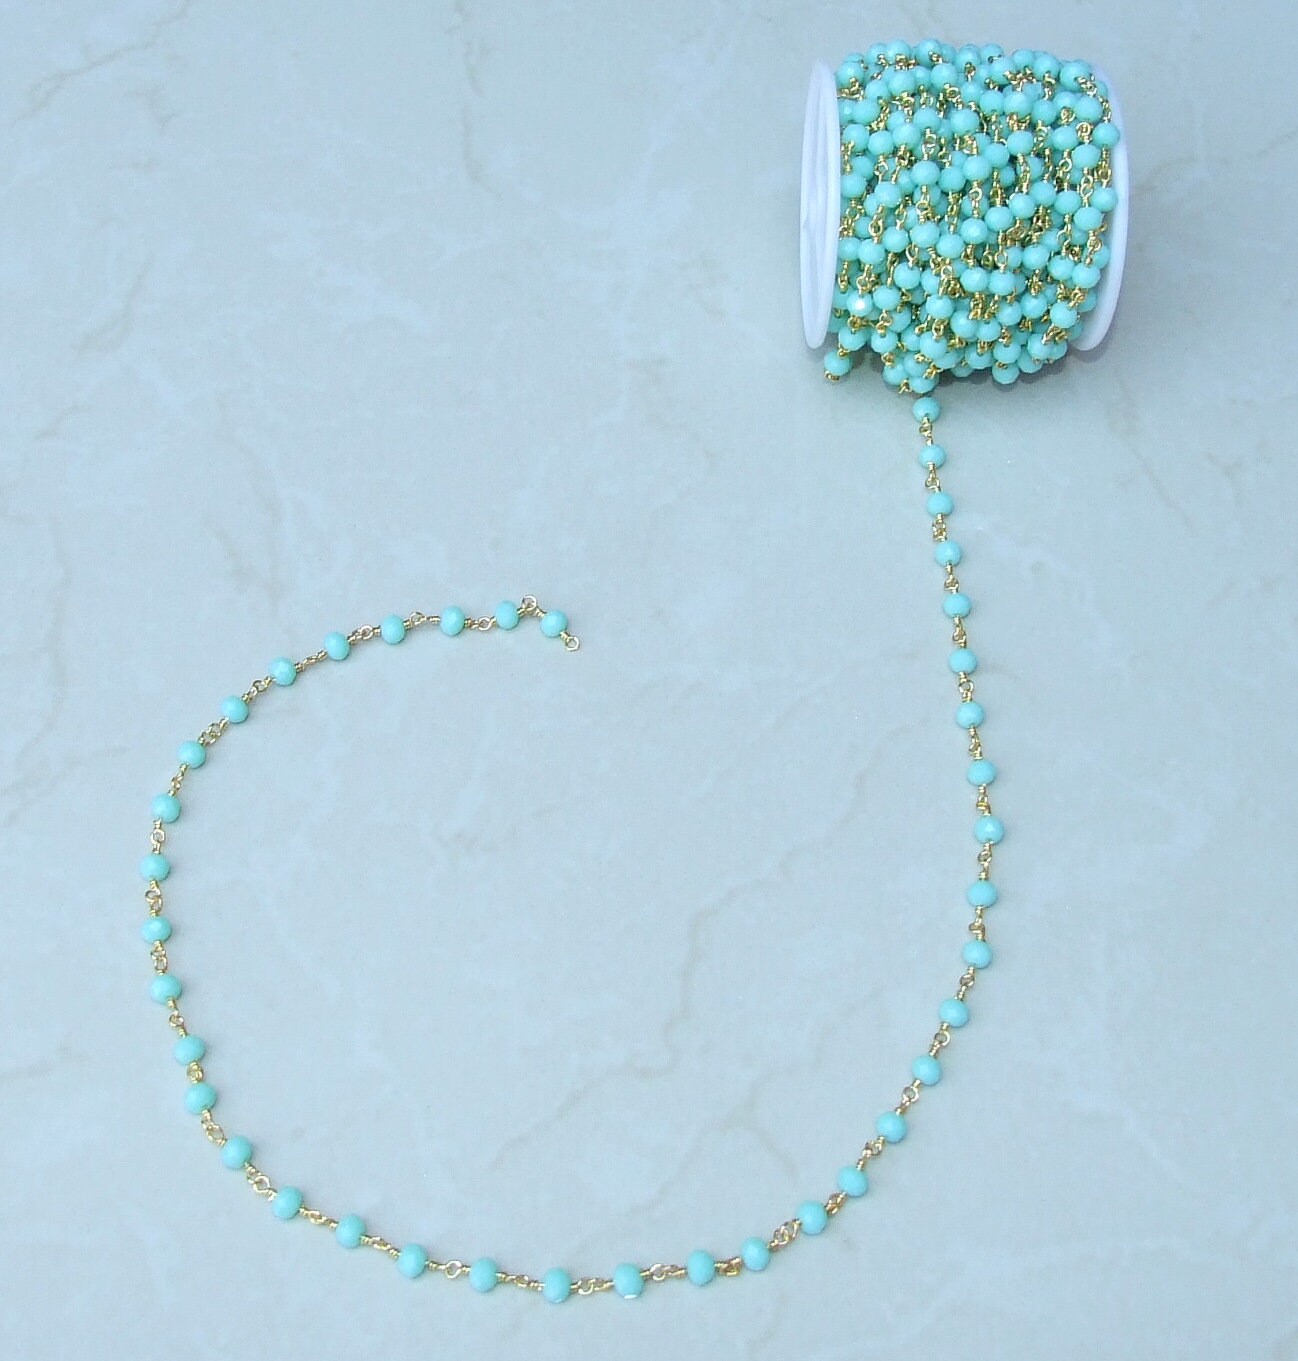 Light Green Glass Rosary Chain, Bulk Chain, Rondelle Glass Beads, Beaded Chain, Body Chain Jewelry, Gold Chain, Necklace Chain, Belly Chain